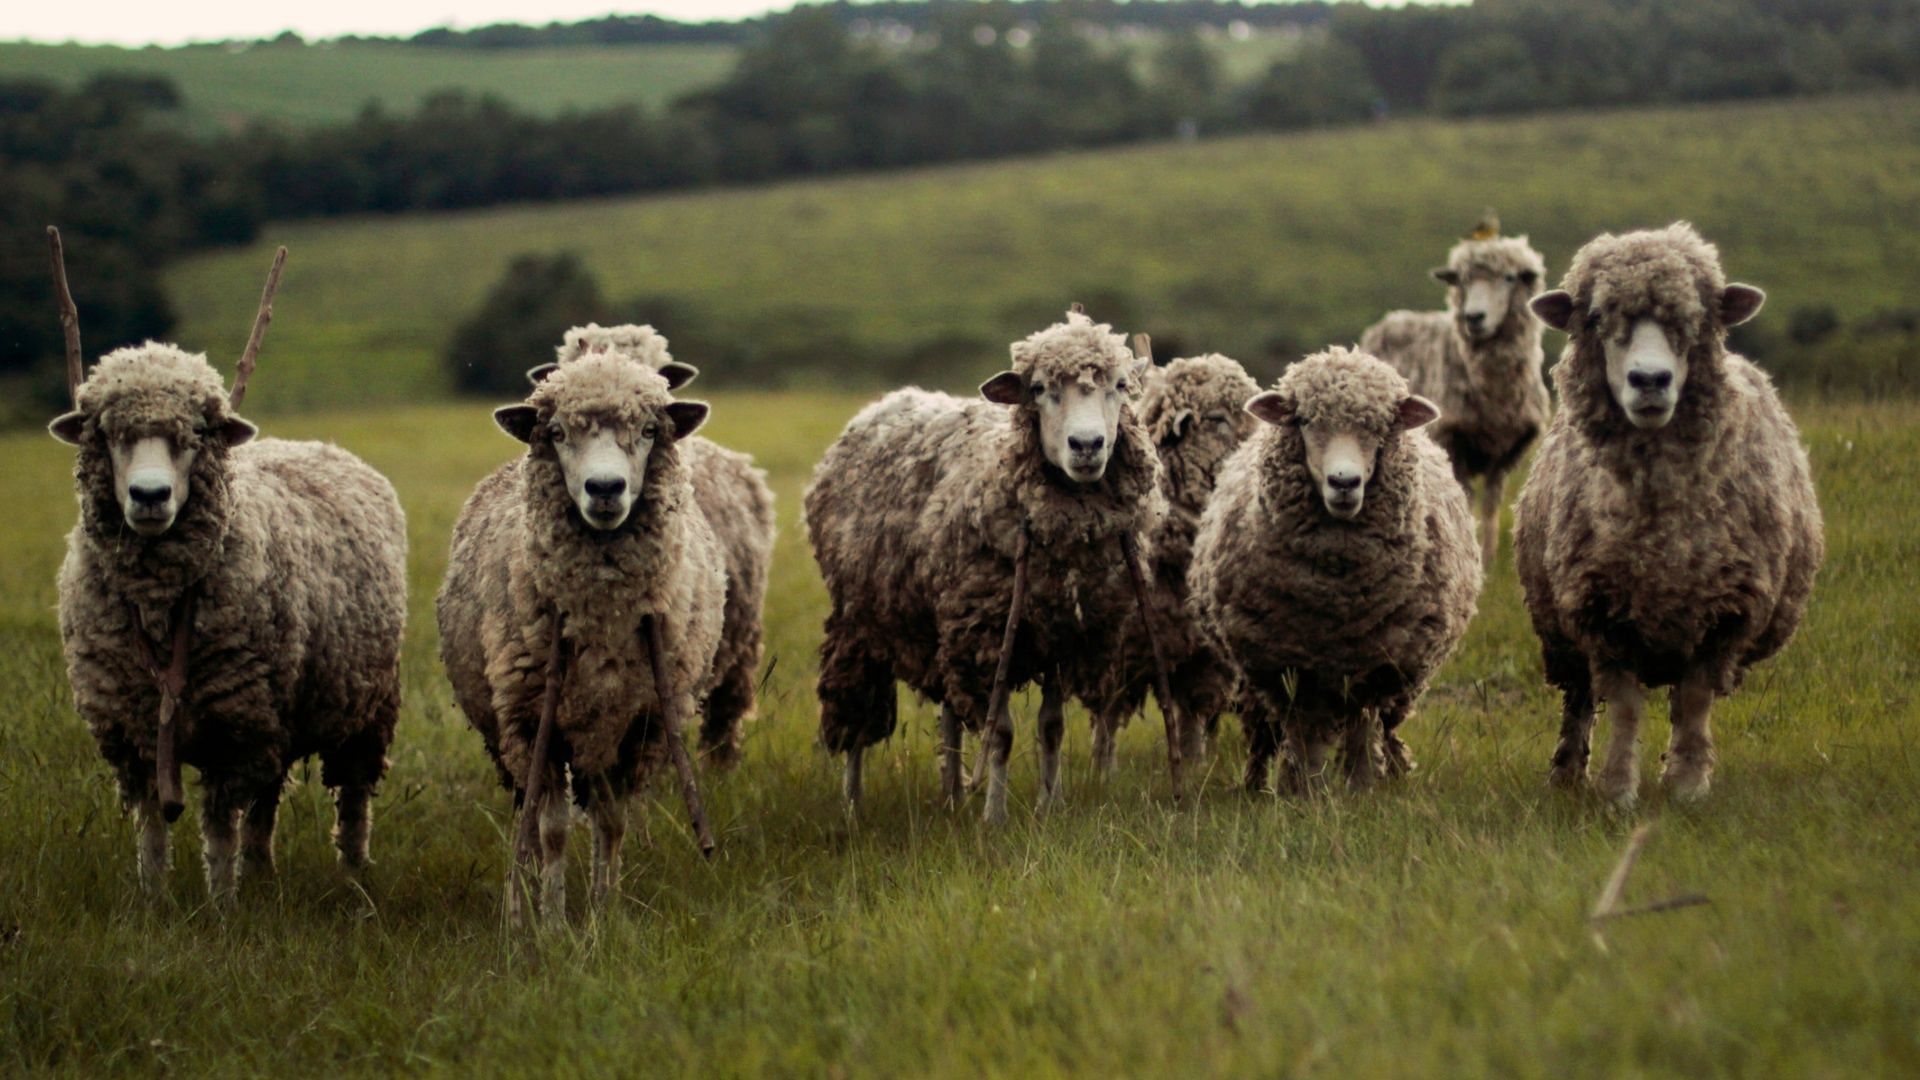 Montana man gets charged for trying to illegally make hybrid sheep (Photo by Ariana Prestes on Unsplash)